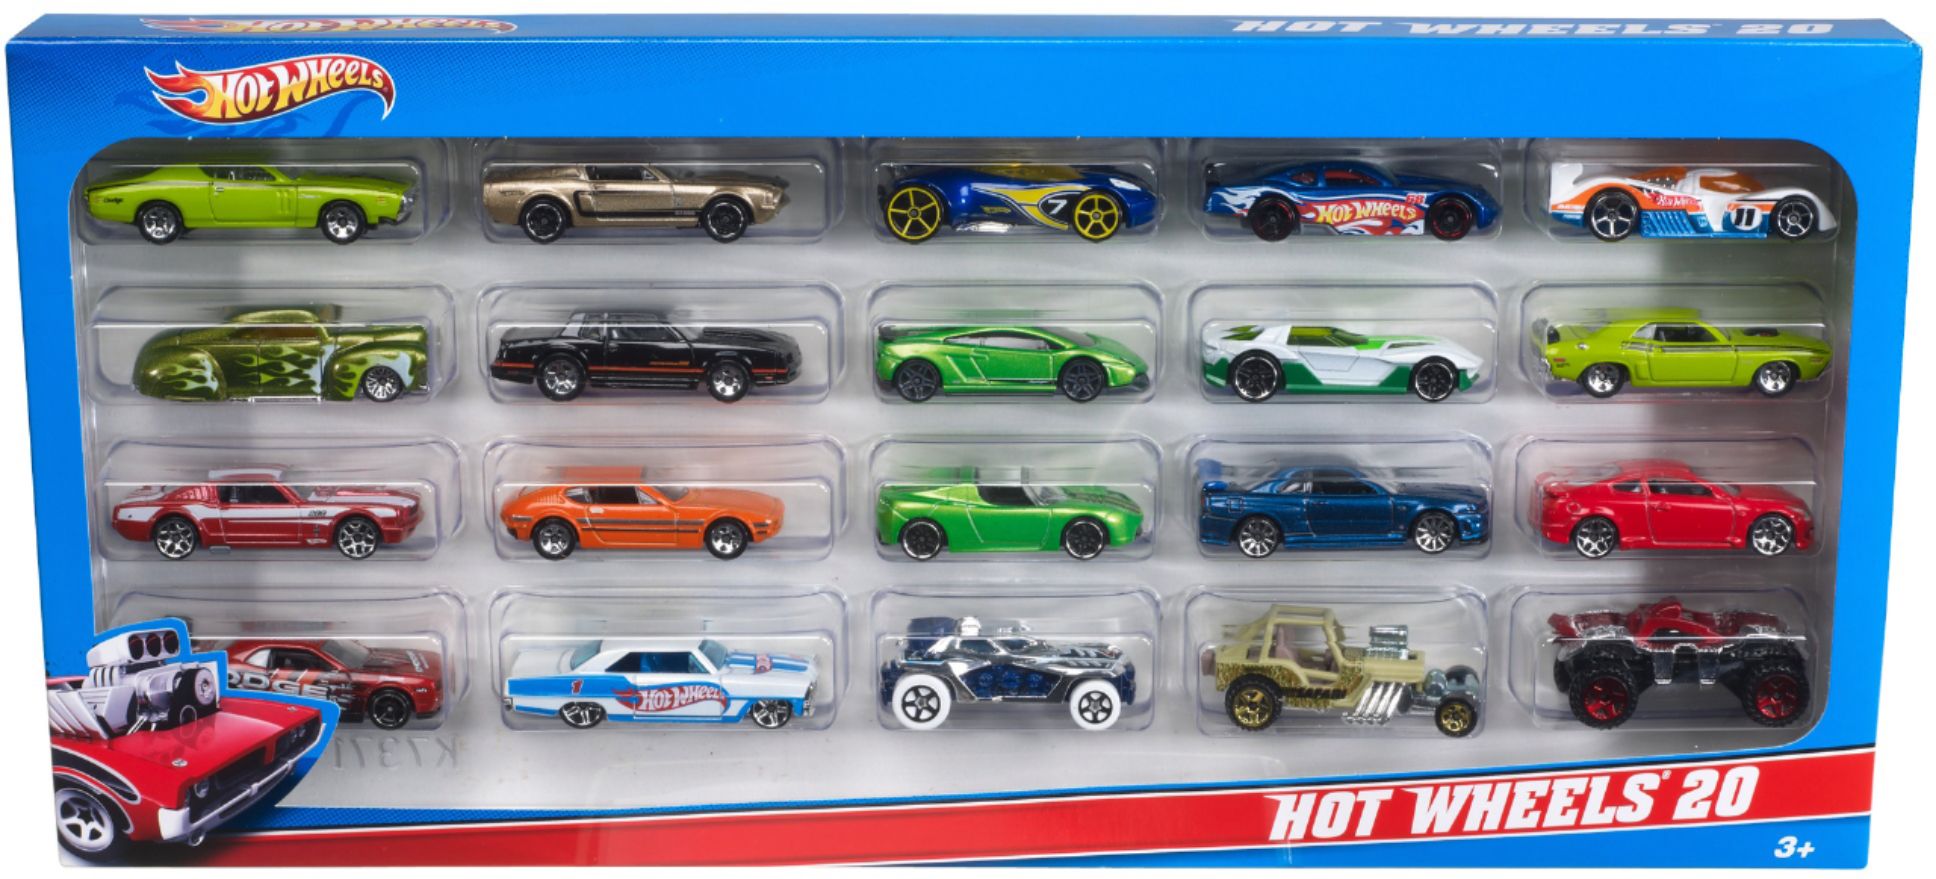 Aproca Hard Storage Carrying Case for Hot Wheels 20 Cars Gift Pack